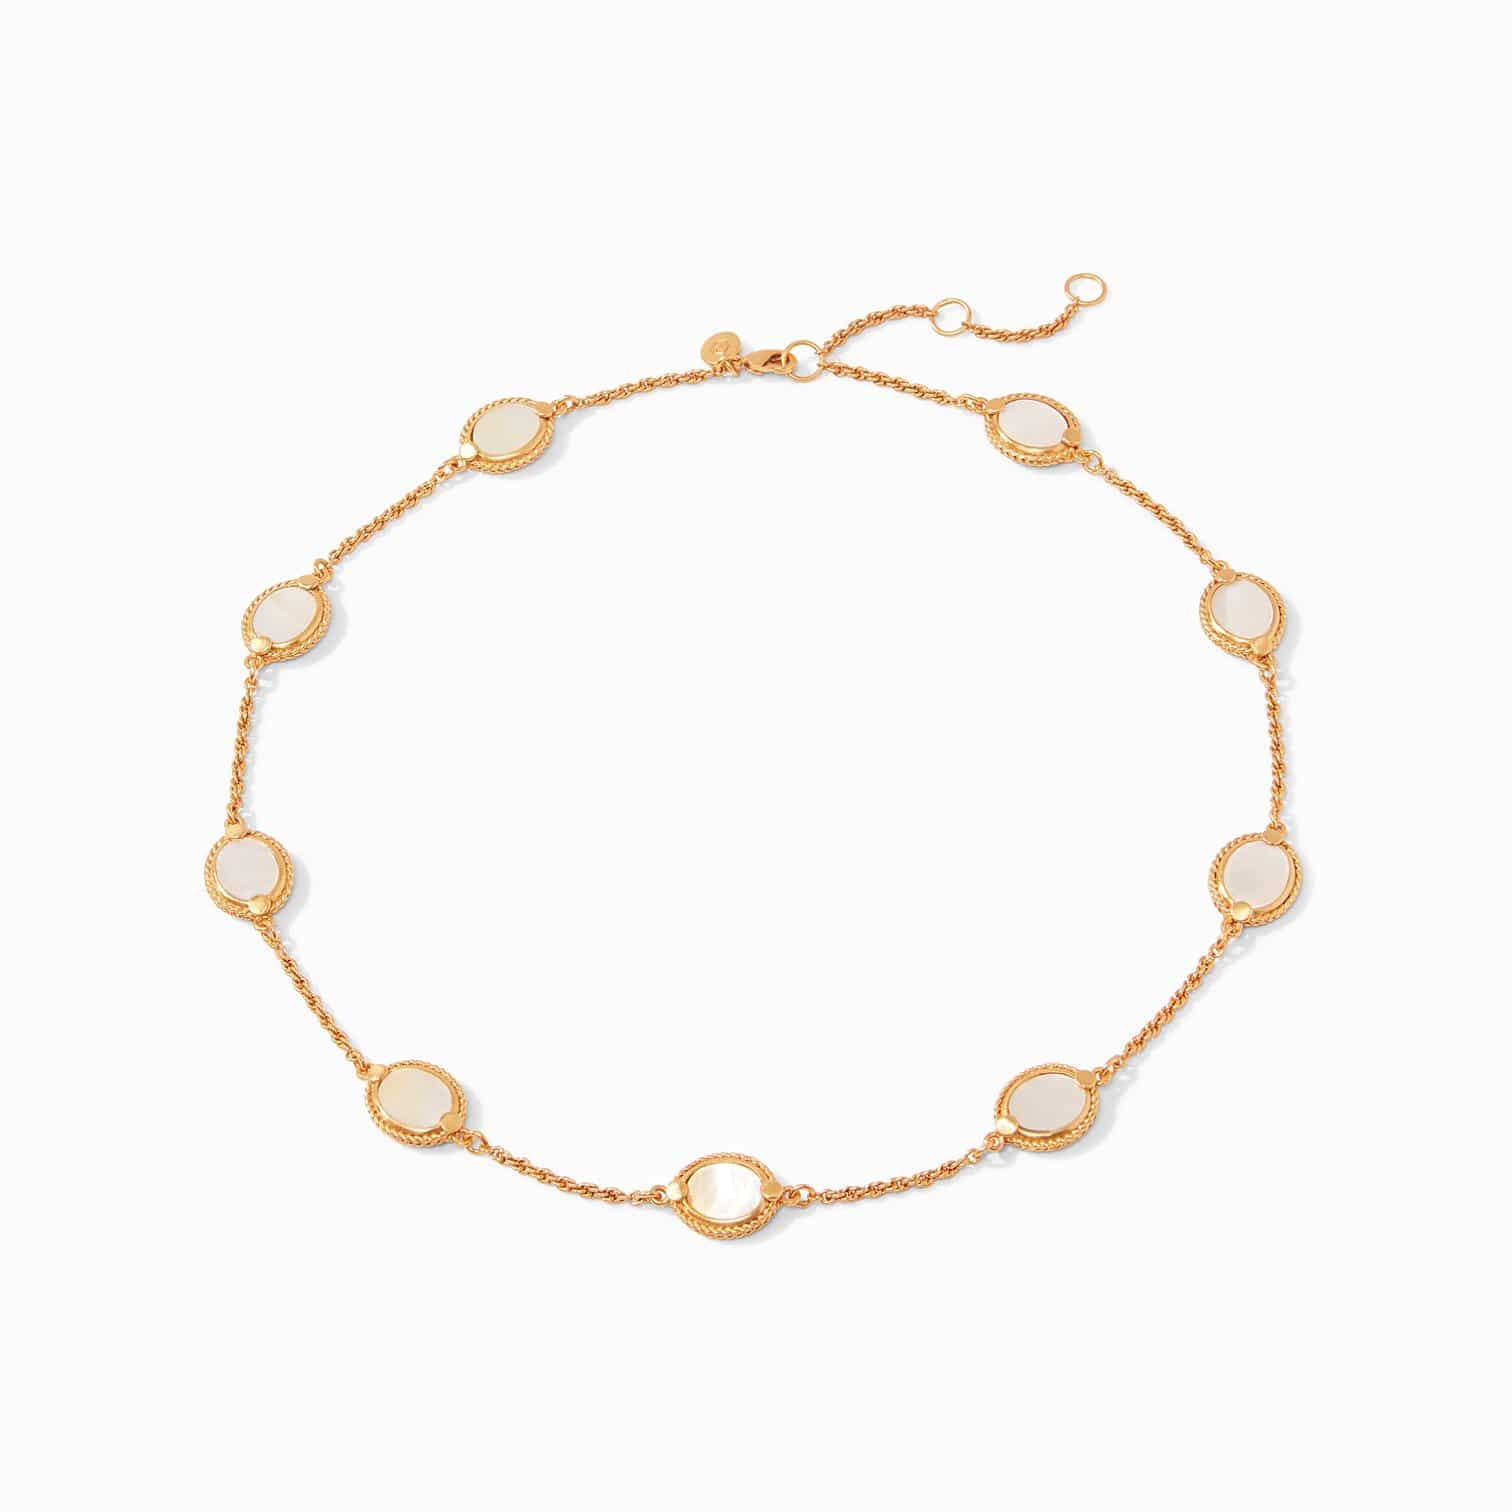 Julie Vos - Julie Vos Calypso Delicate Station Necklace with Mother of Pearl Stones - Little Miss Muffin Children & Home